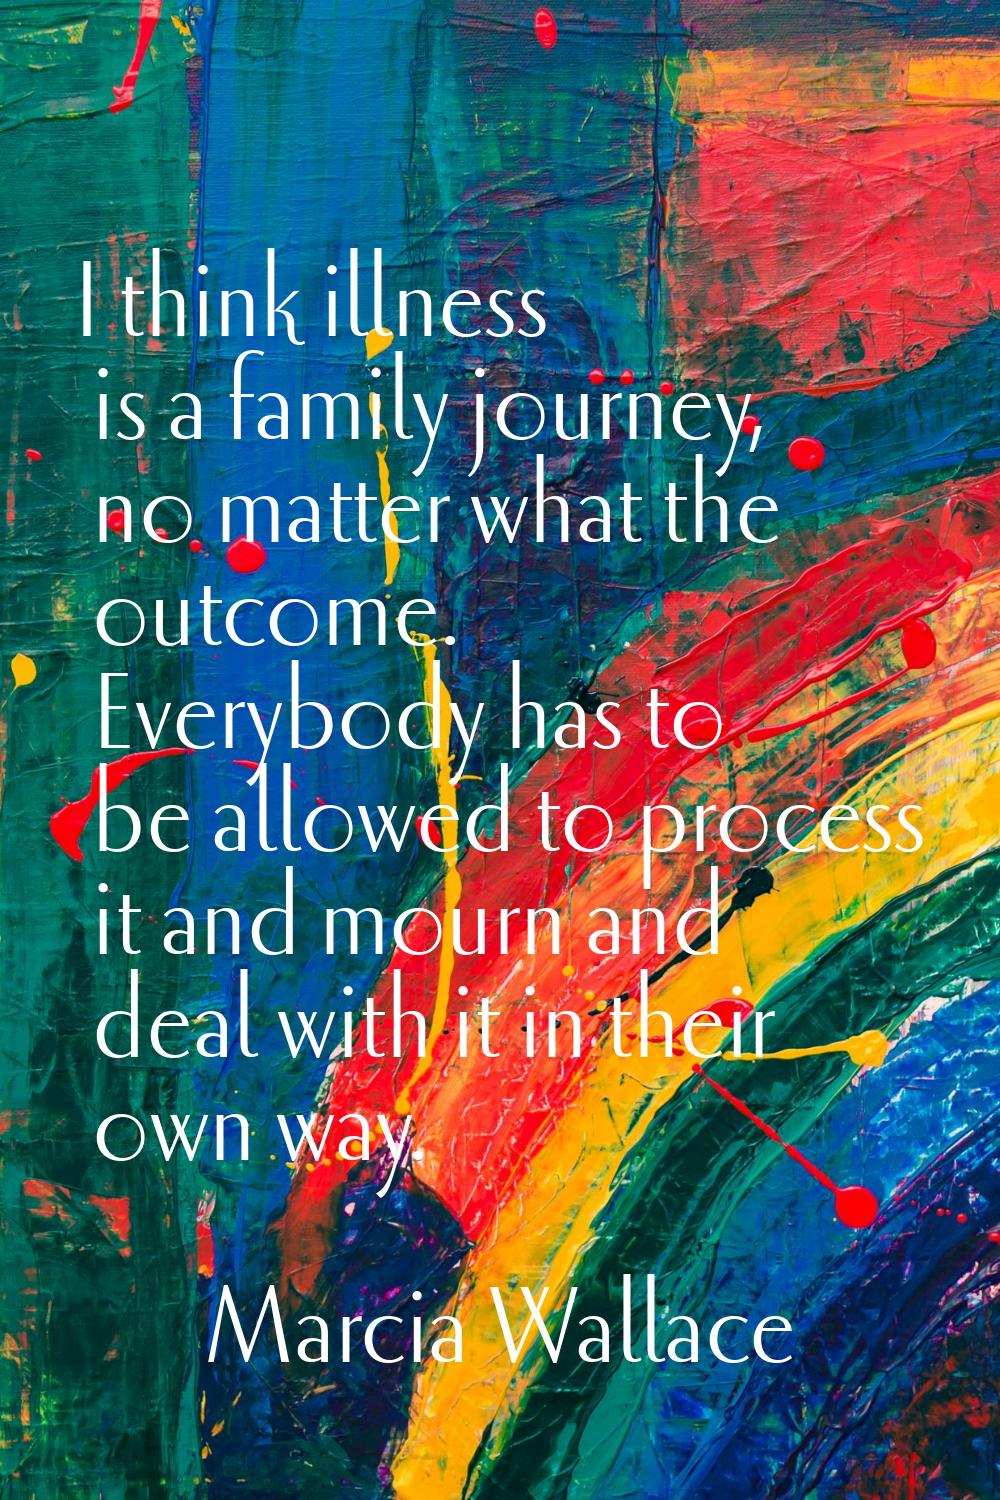 I think illness is a family journey, no matter what the outcome. Everybody has to be allowed to pro